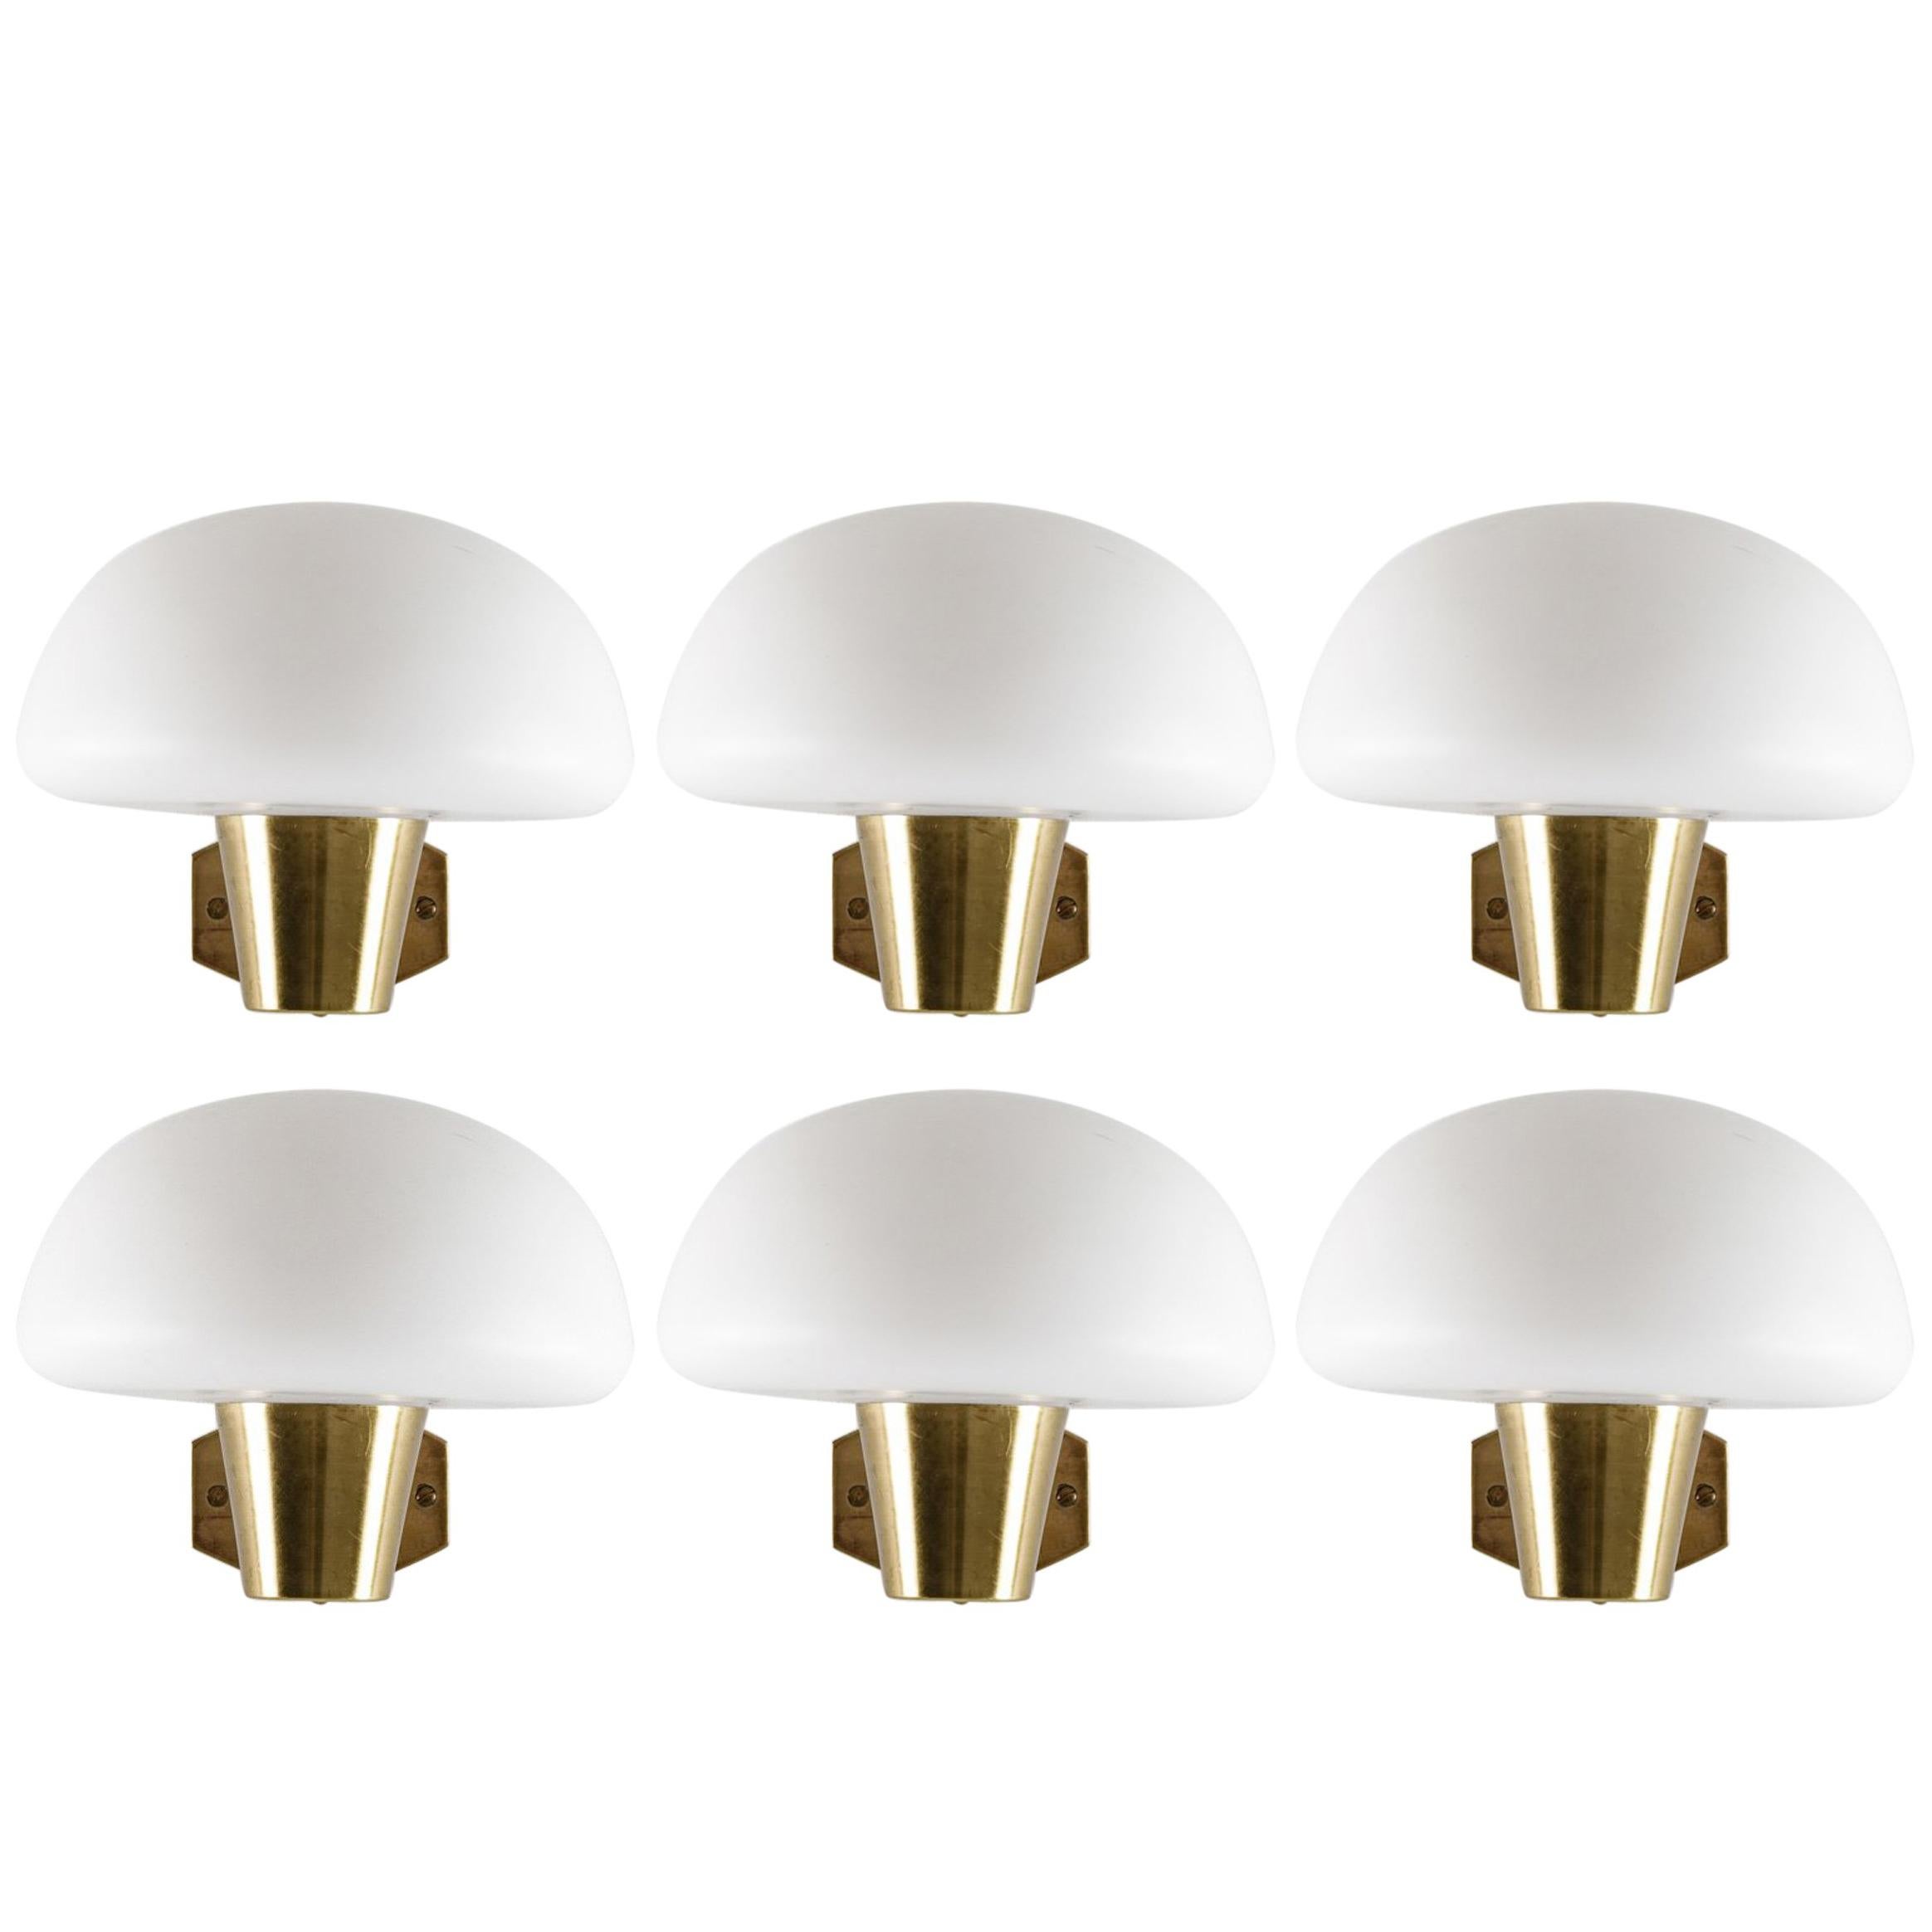 Set of Six Swedish Midcentury Wall Lamps in Brass and Opaline Glass